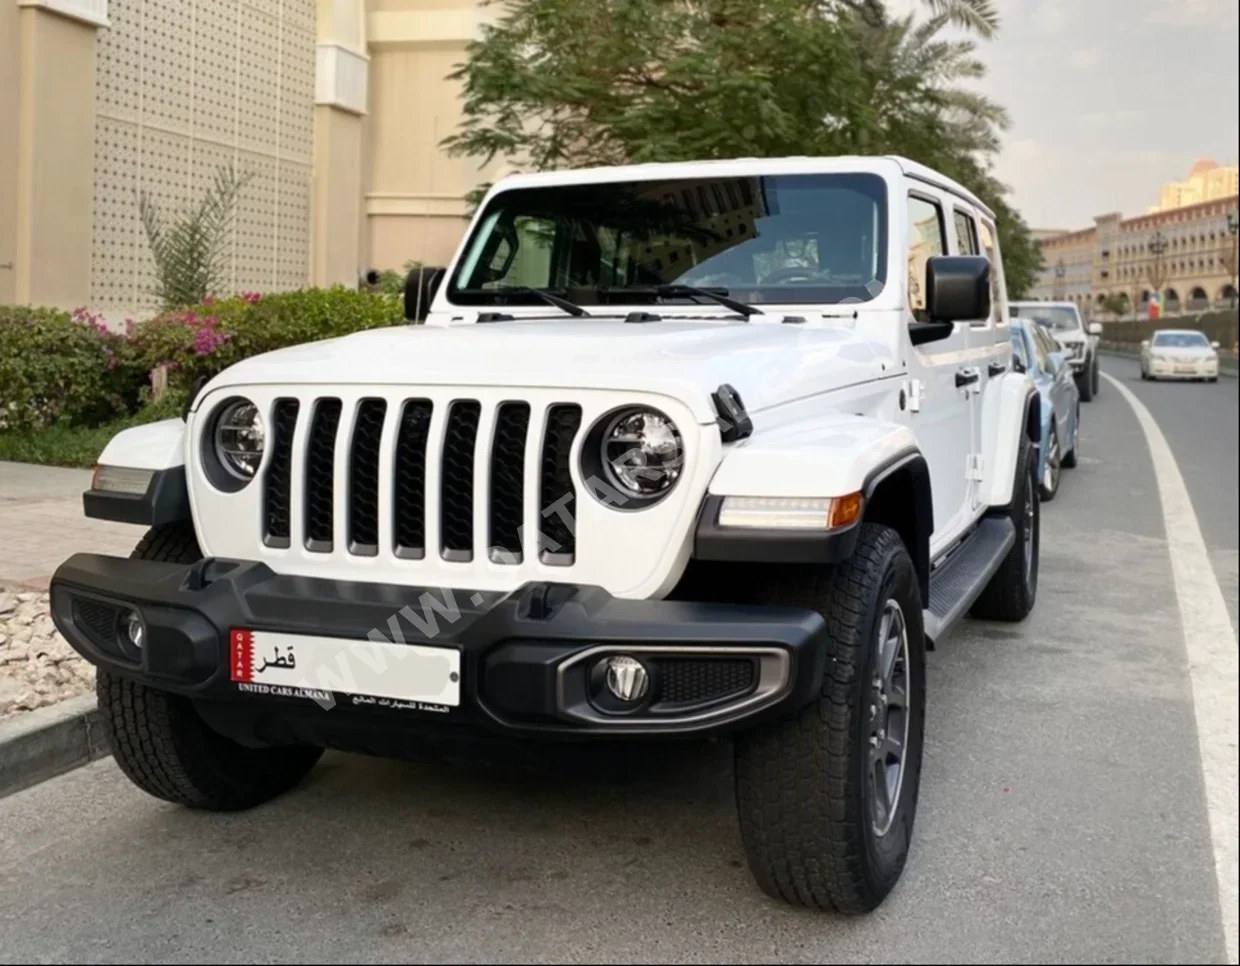 Jeep  Wrangler  80th Anniversary  2021  Automatic  27,500 Km  6 Cylinder  Four Wheel Drive (4WD)  SUV  White